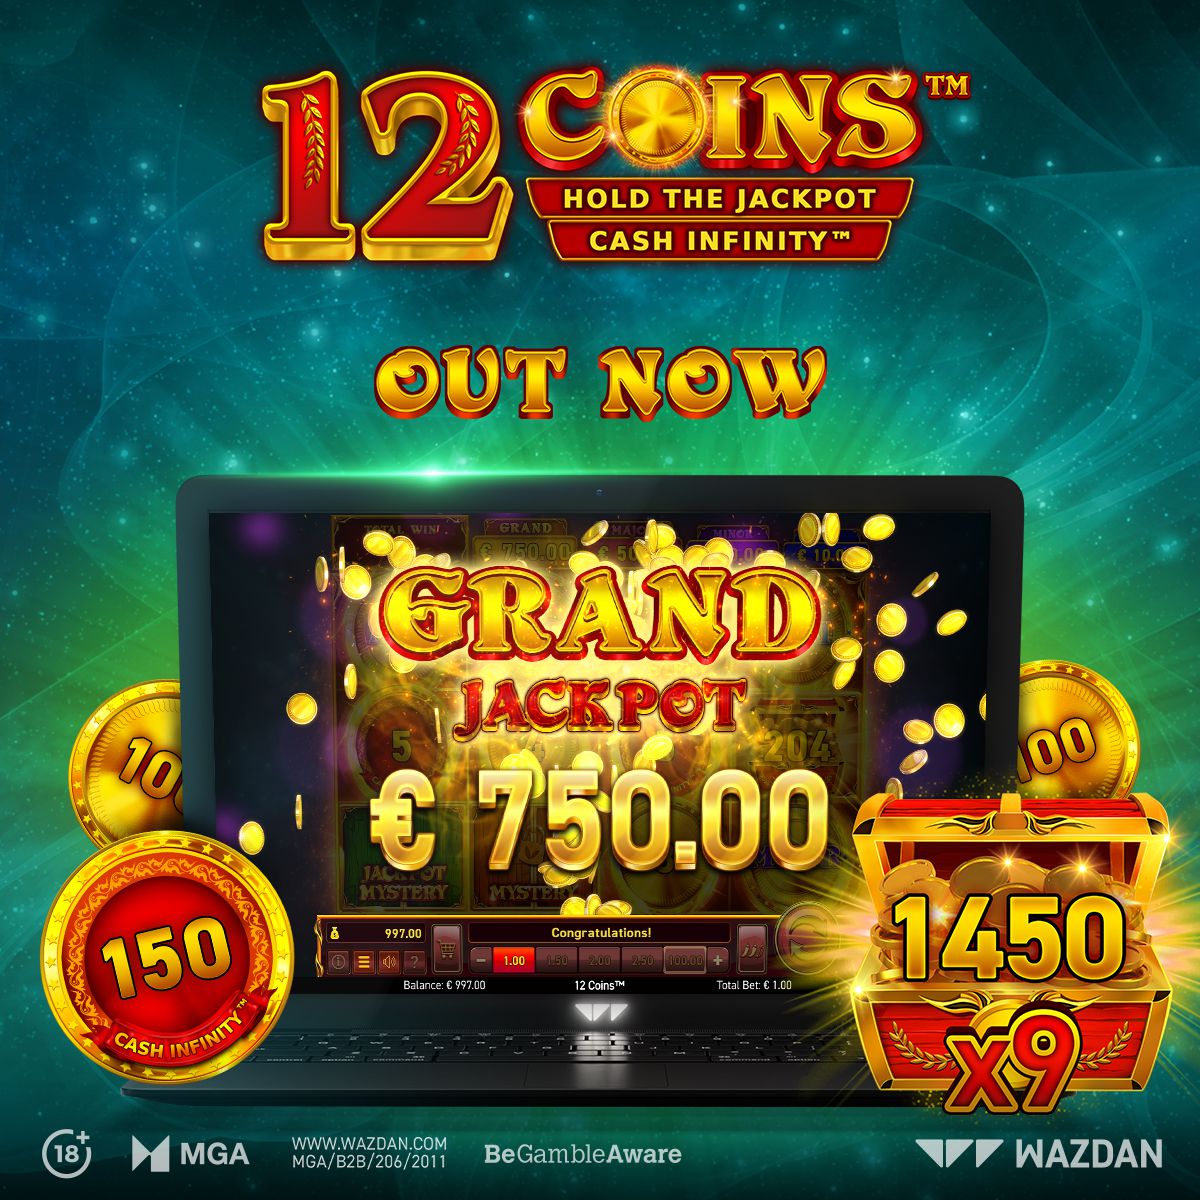 Do you hear the reels spinning? It’s the sound of 12 Coins™ which is out NOW! &#128293;

Spin more reels and land more coins for the biggest prizes of them all! &#128176;

+18 | Play responsibly

